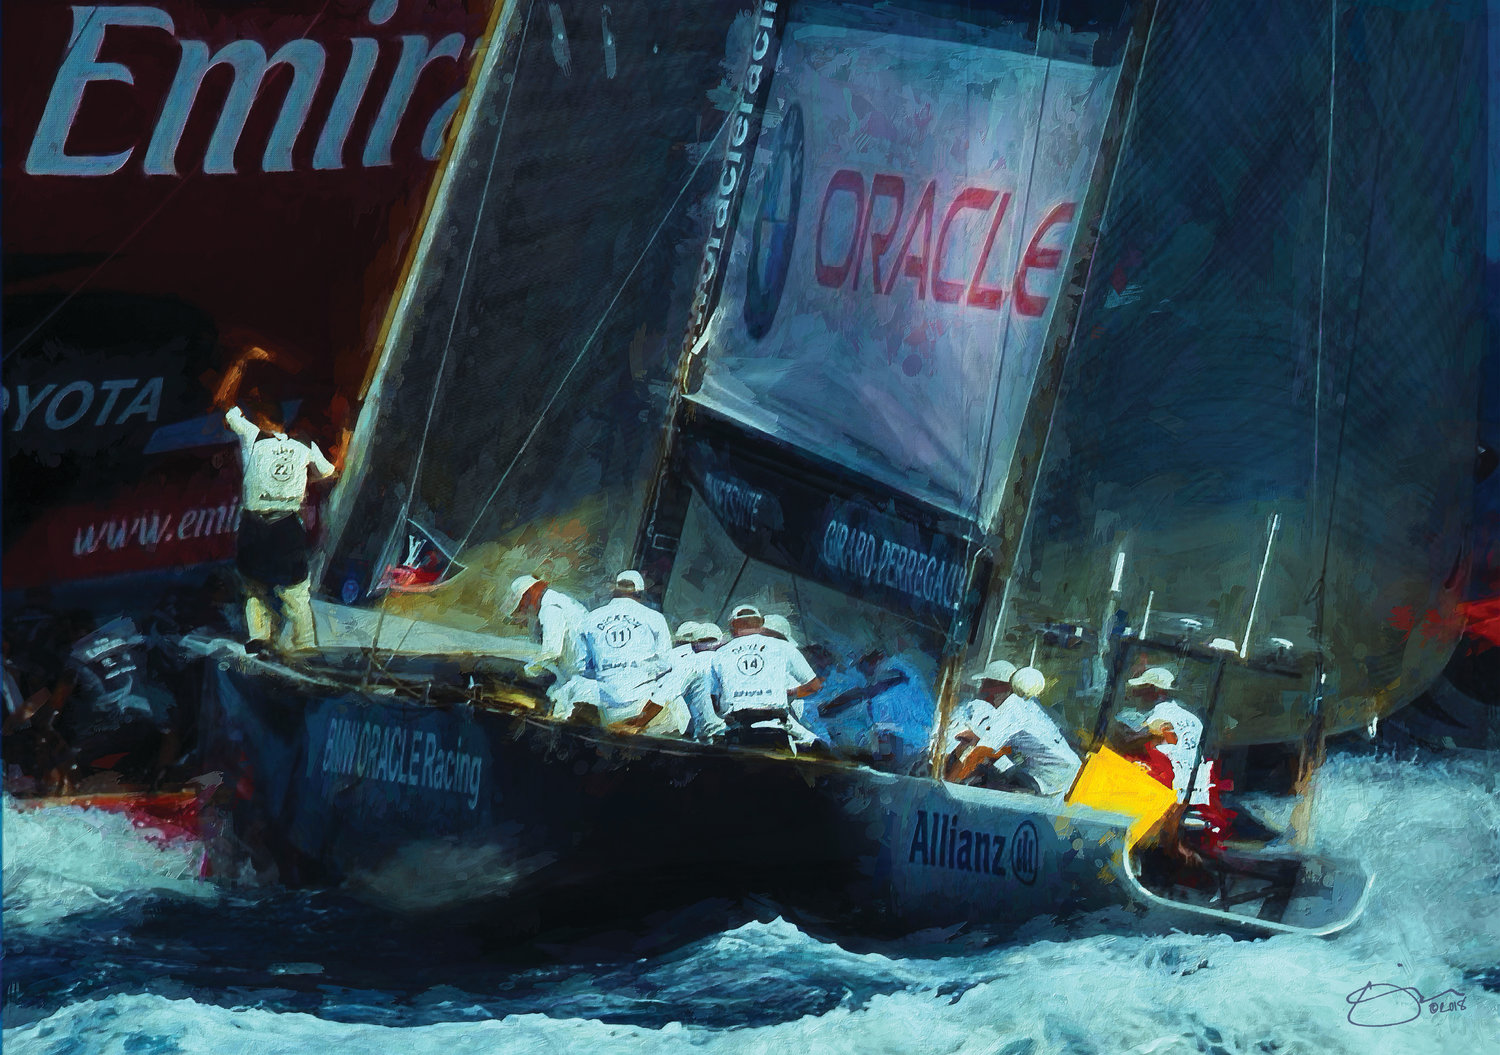 This painting by Odin Oldenburg is titled “Oracle Wins America’s Cup"